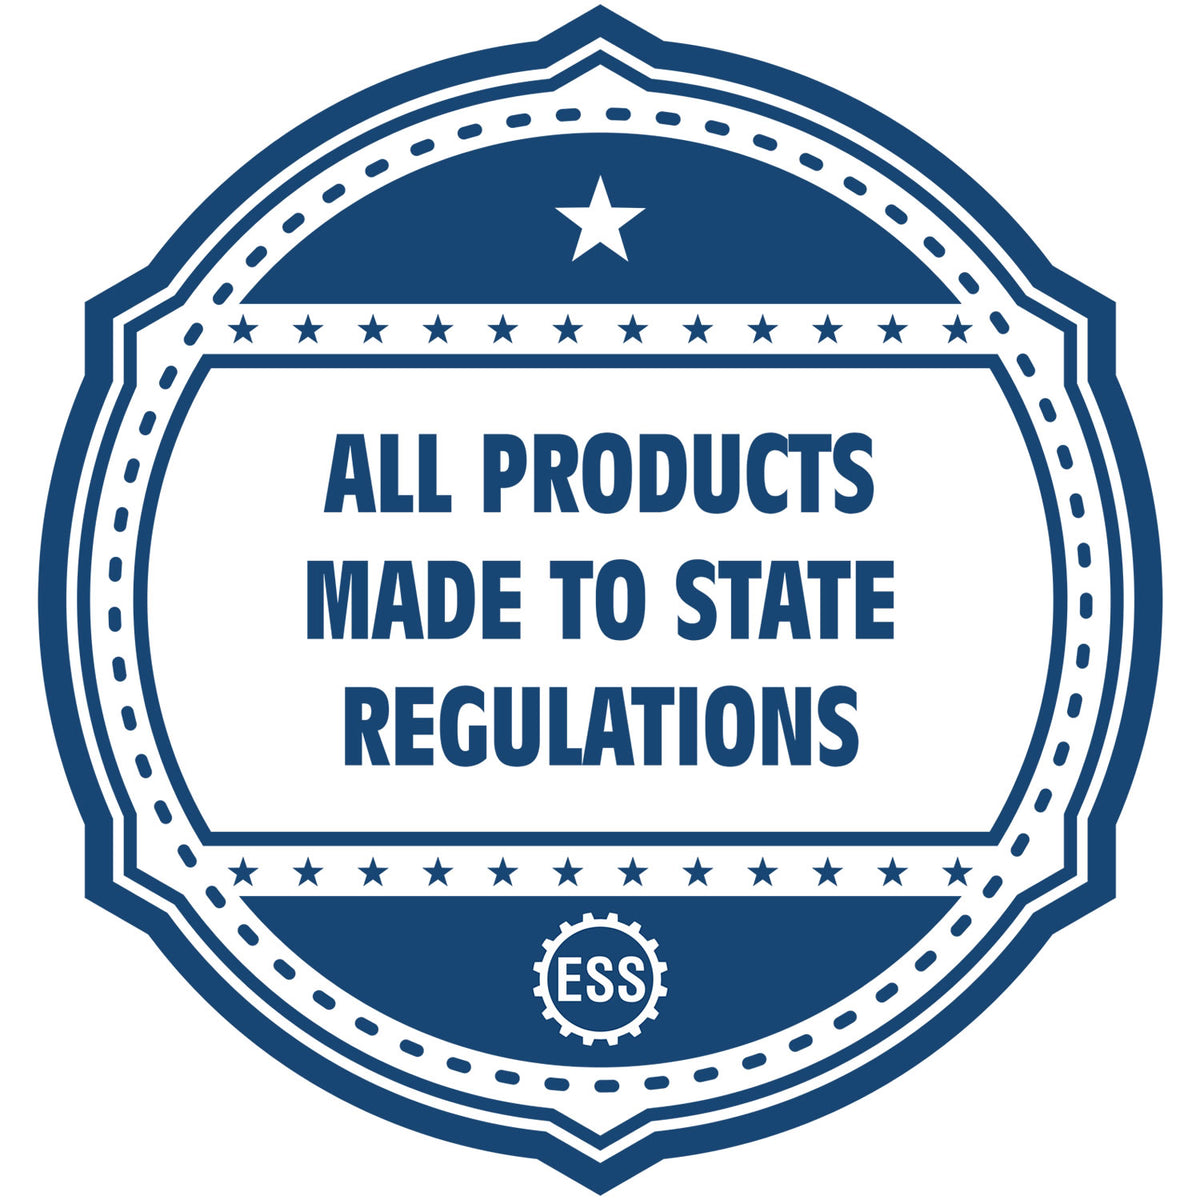 A blue icon or badge for the Slim Pre-Inked Indiana Professional Geologist Seal Stamp showing that this product is made in compliance with state regulations.